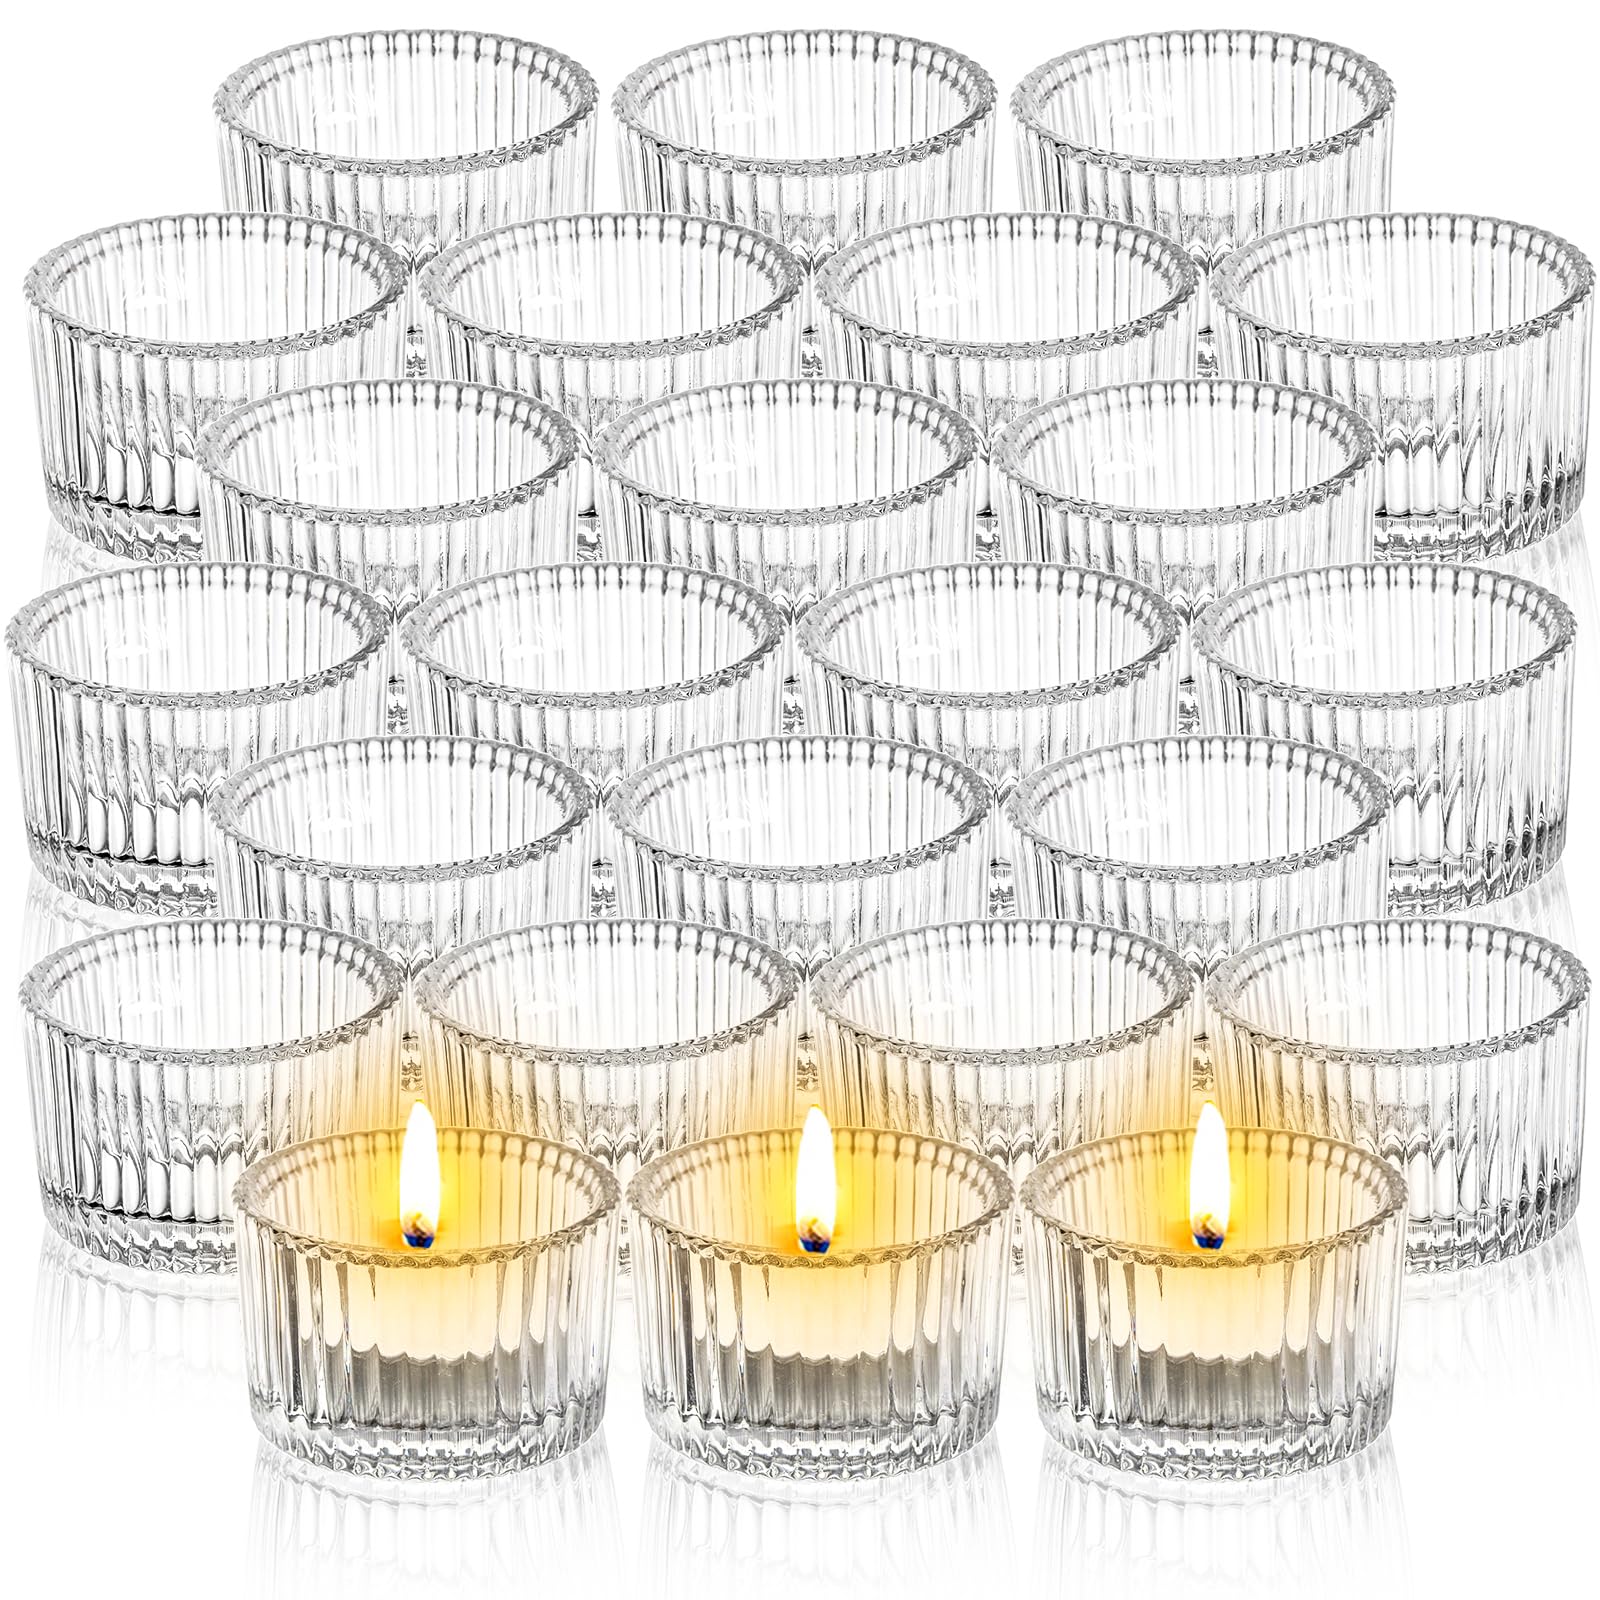 Elsjoy 24 Pack Glass Tealight Candle Holder, 2" x 1.4" Small Clear Glass Votive Candle Holders Mini Ribbed Tealight Holder for Wedding, Birthday, Festival, Table Centerpiece